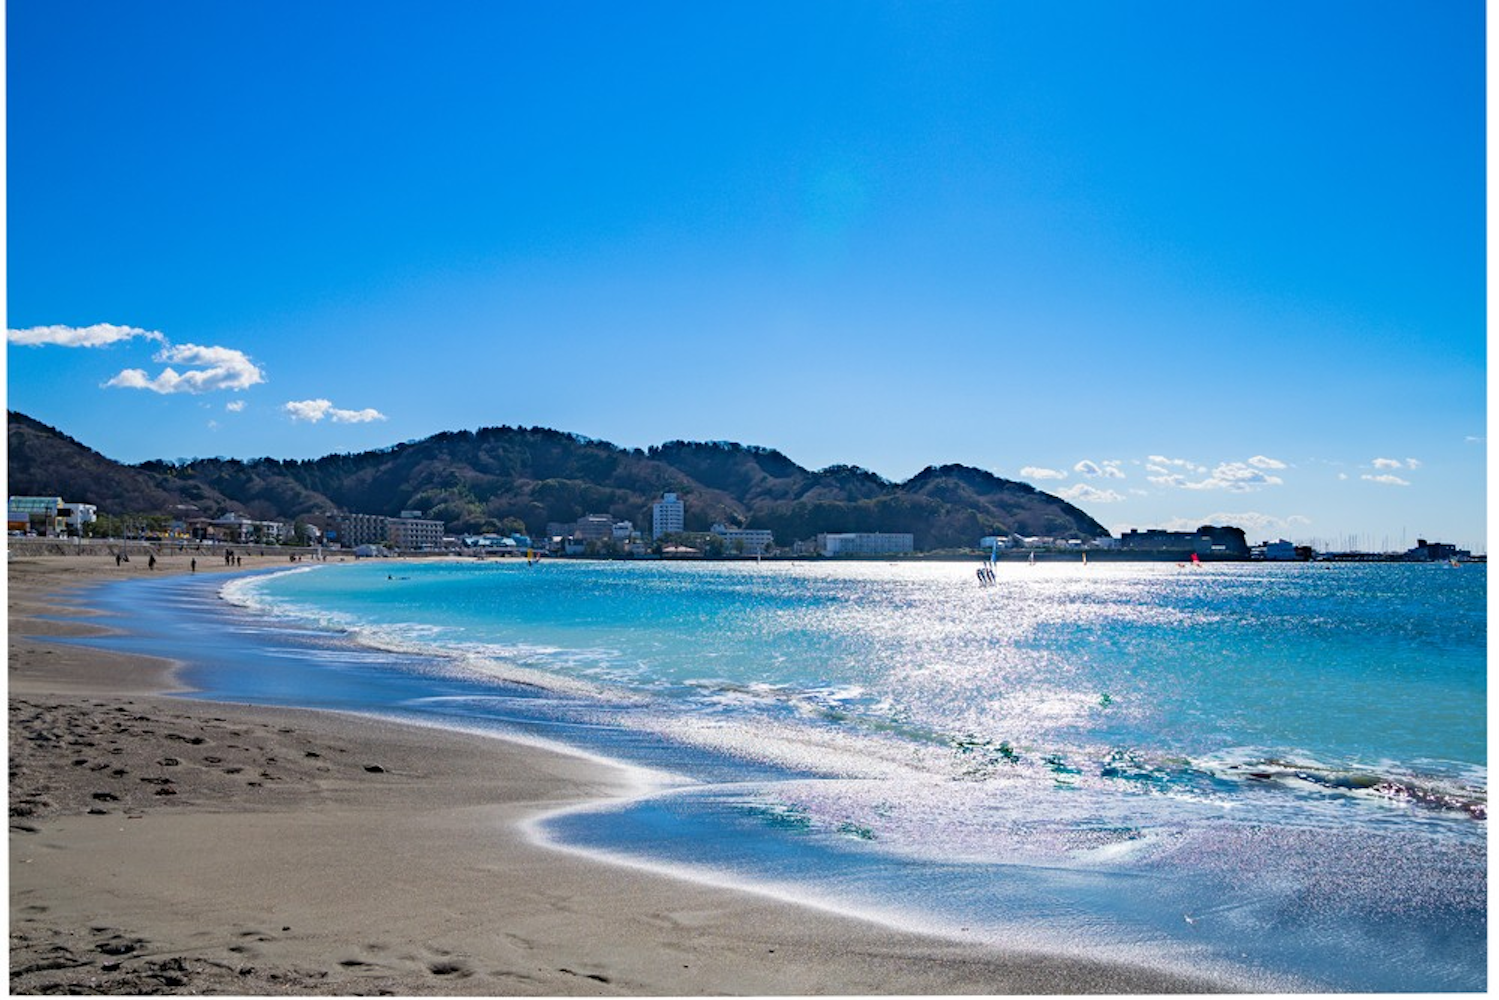 Surreal view of Yuigahama Beach on sunny day in Kamakura, Japan with blue water and a hill in the background.